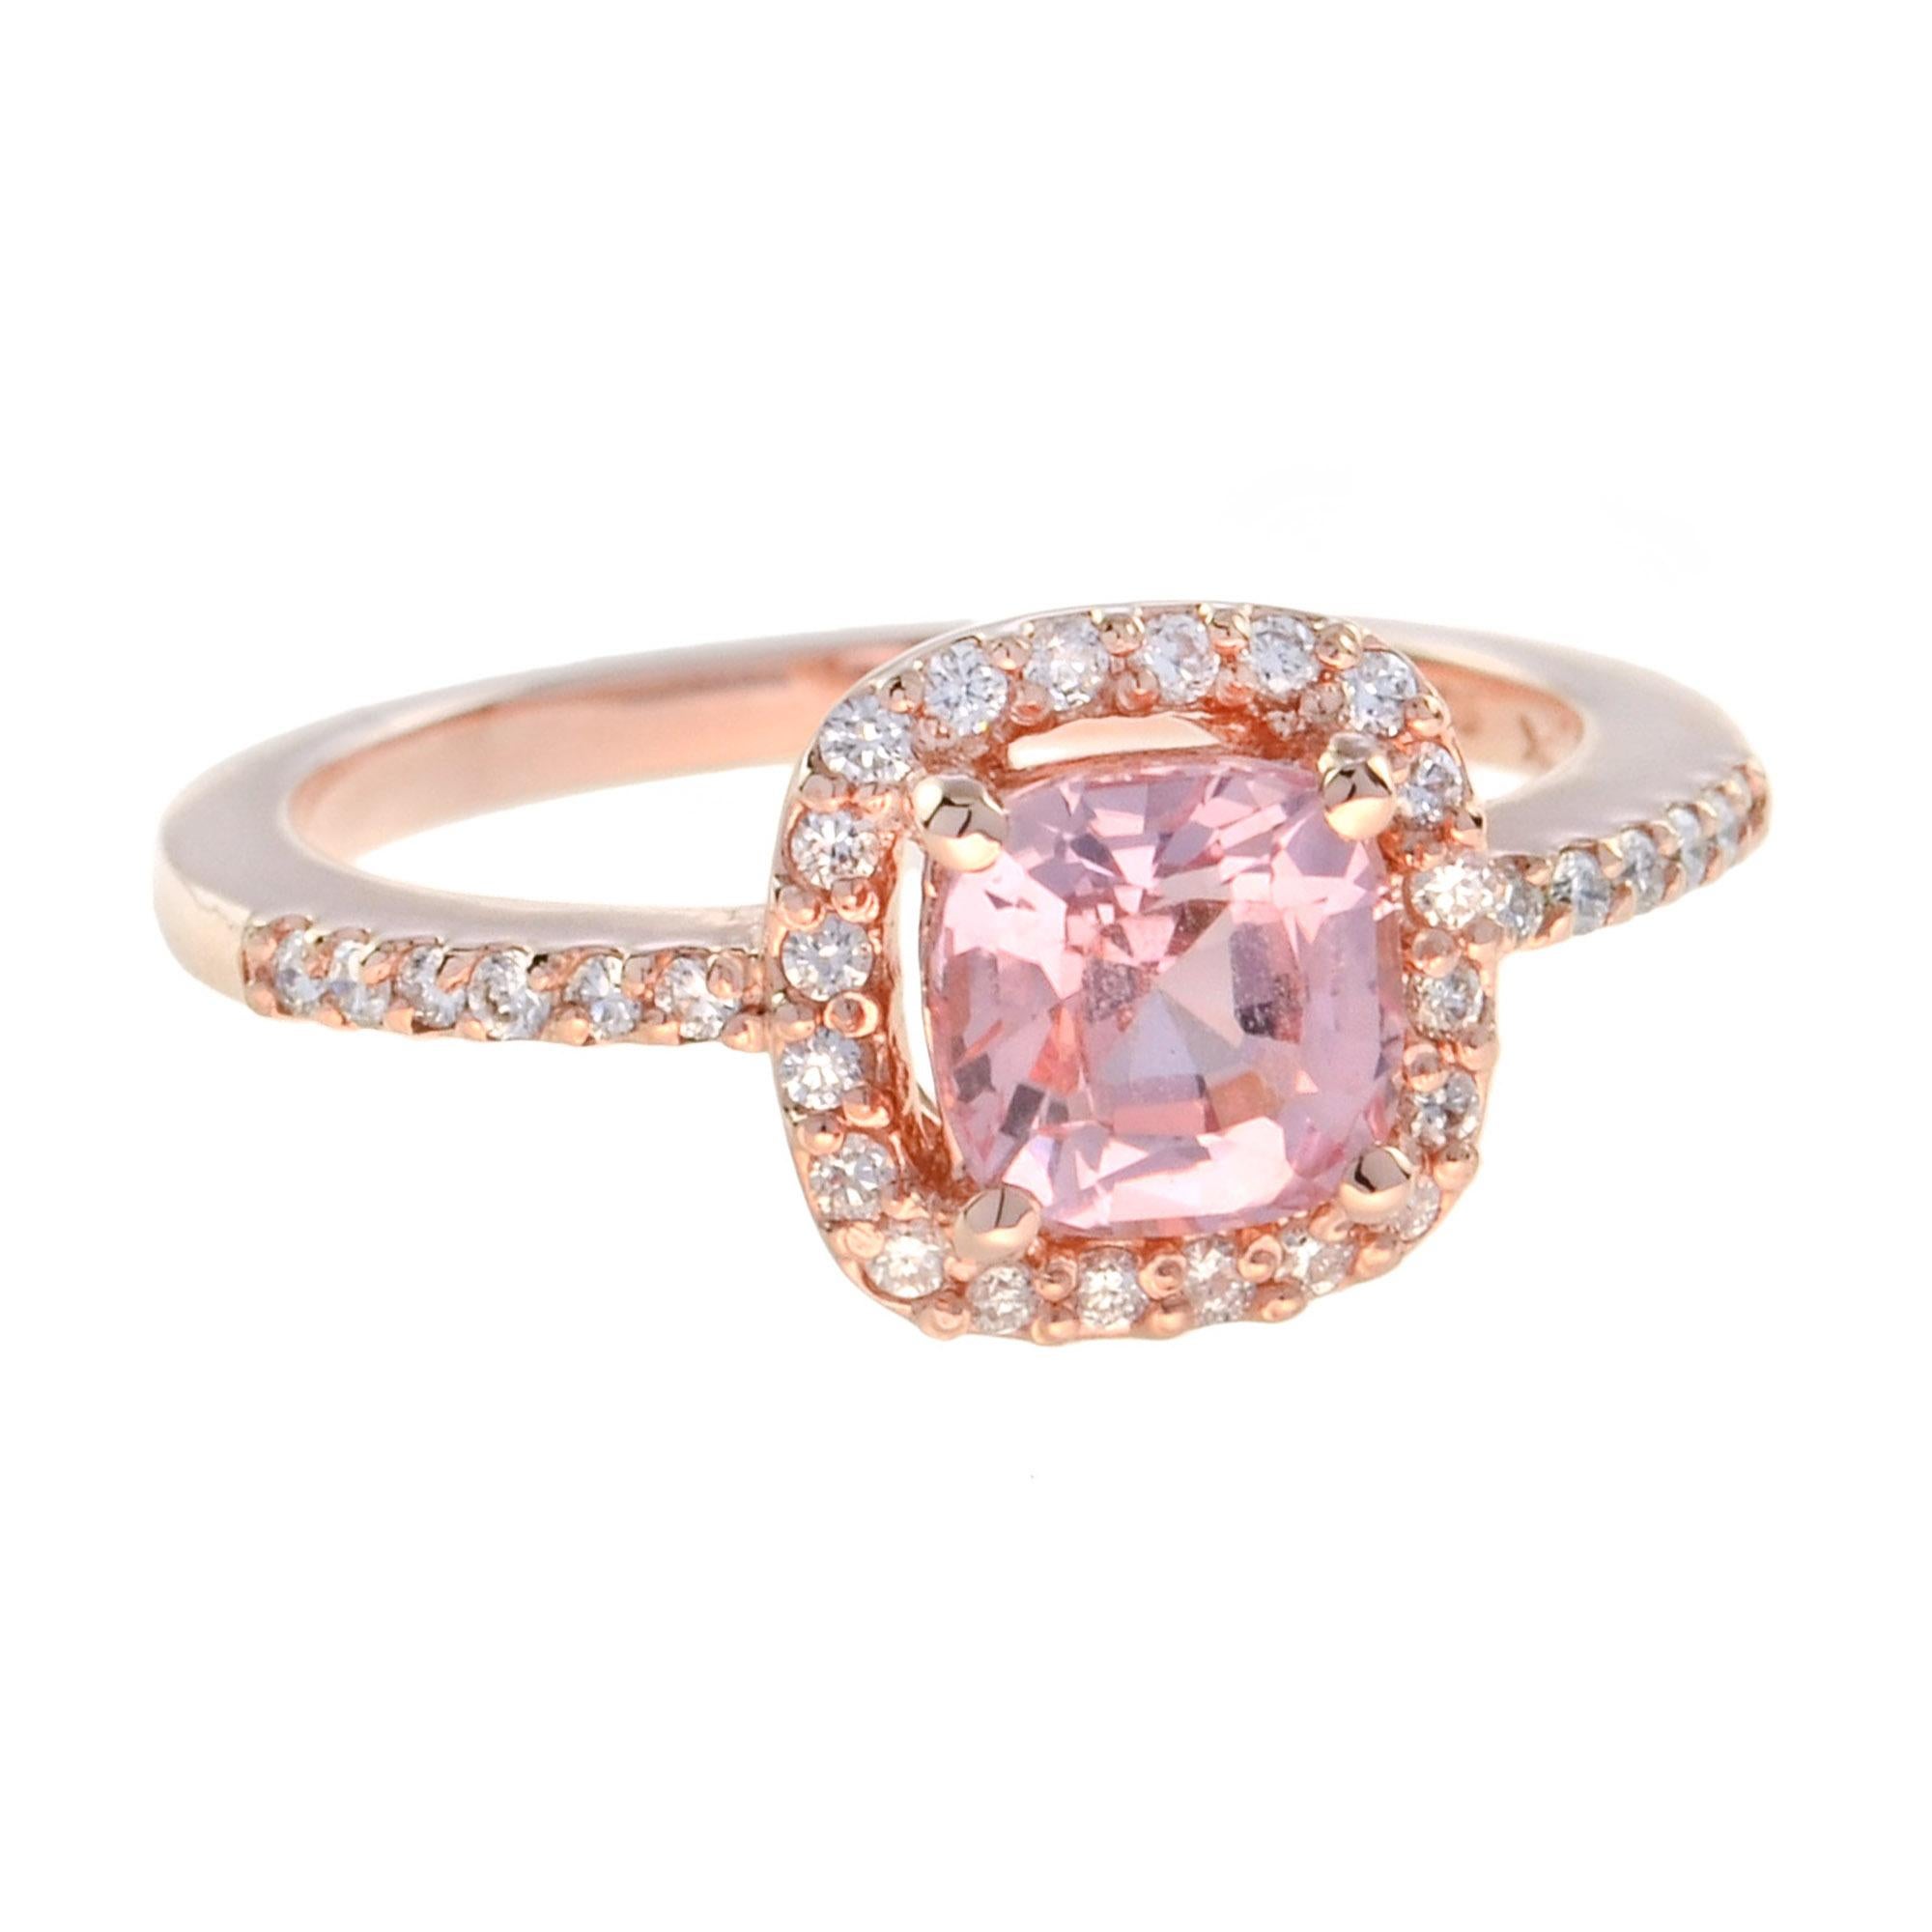 For Sale:  Halona Cushion Morganite and Diamond Halo Ring in 14K Rose Gold 2